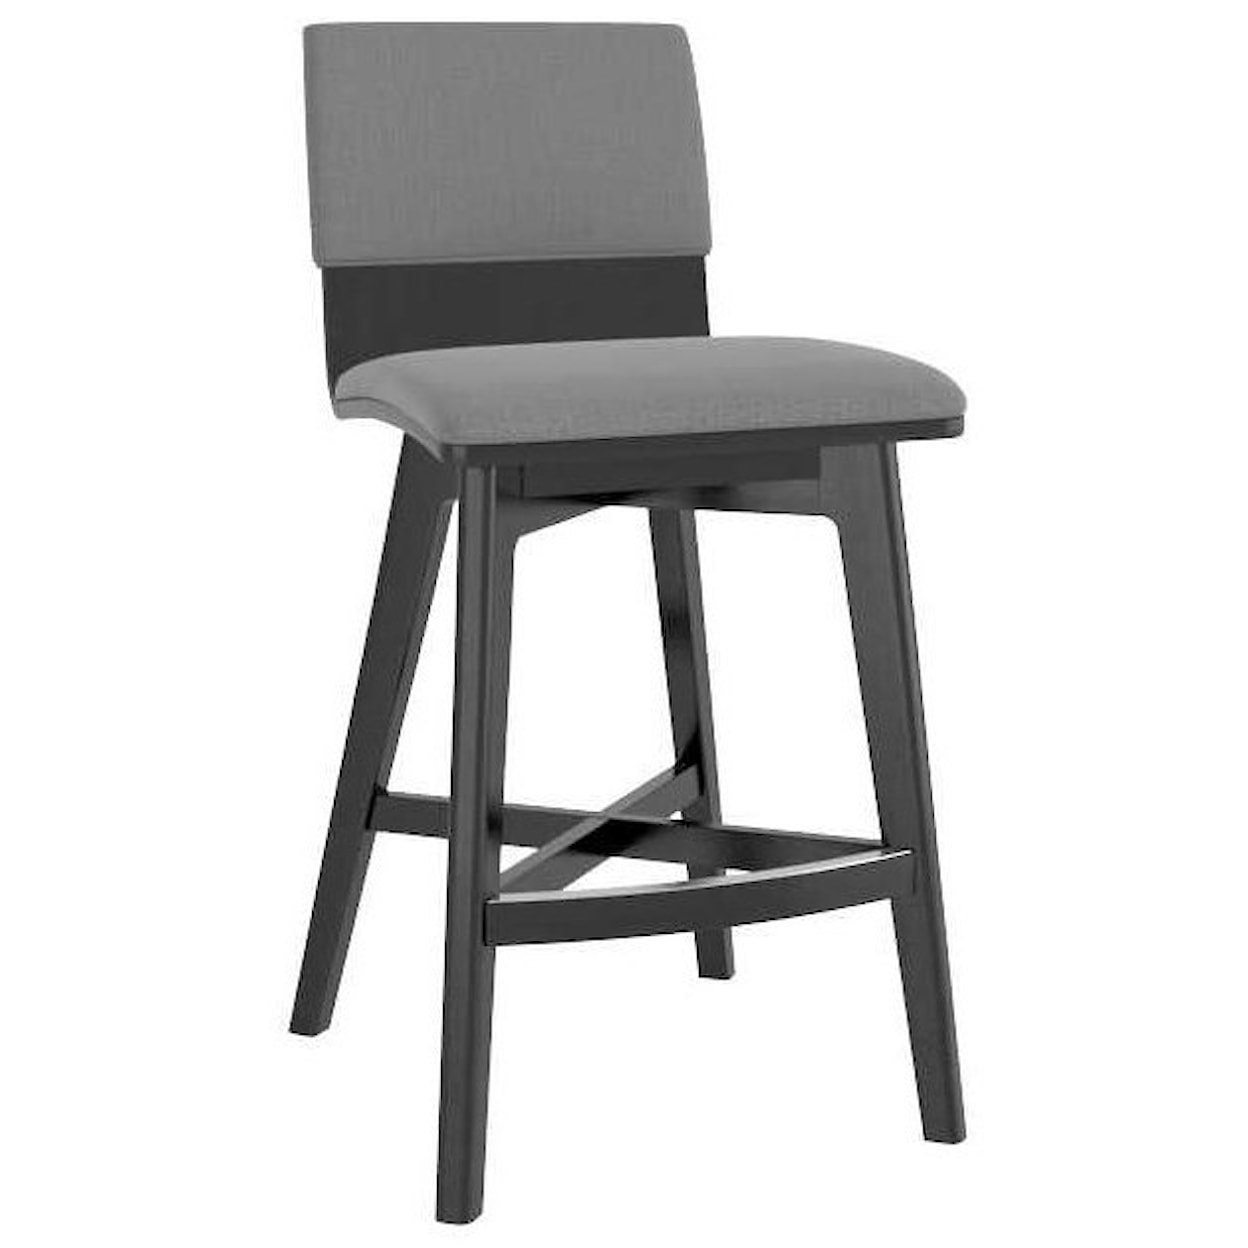 Canadel Downtown - Custom Dining Customizable Upholstered Fixed Stool